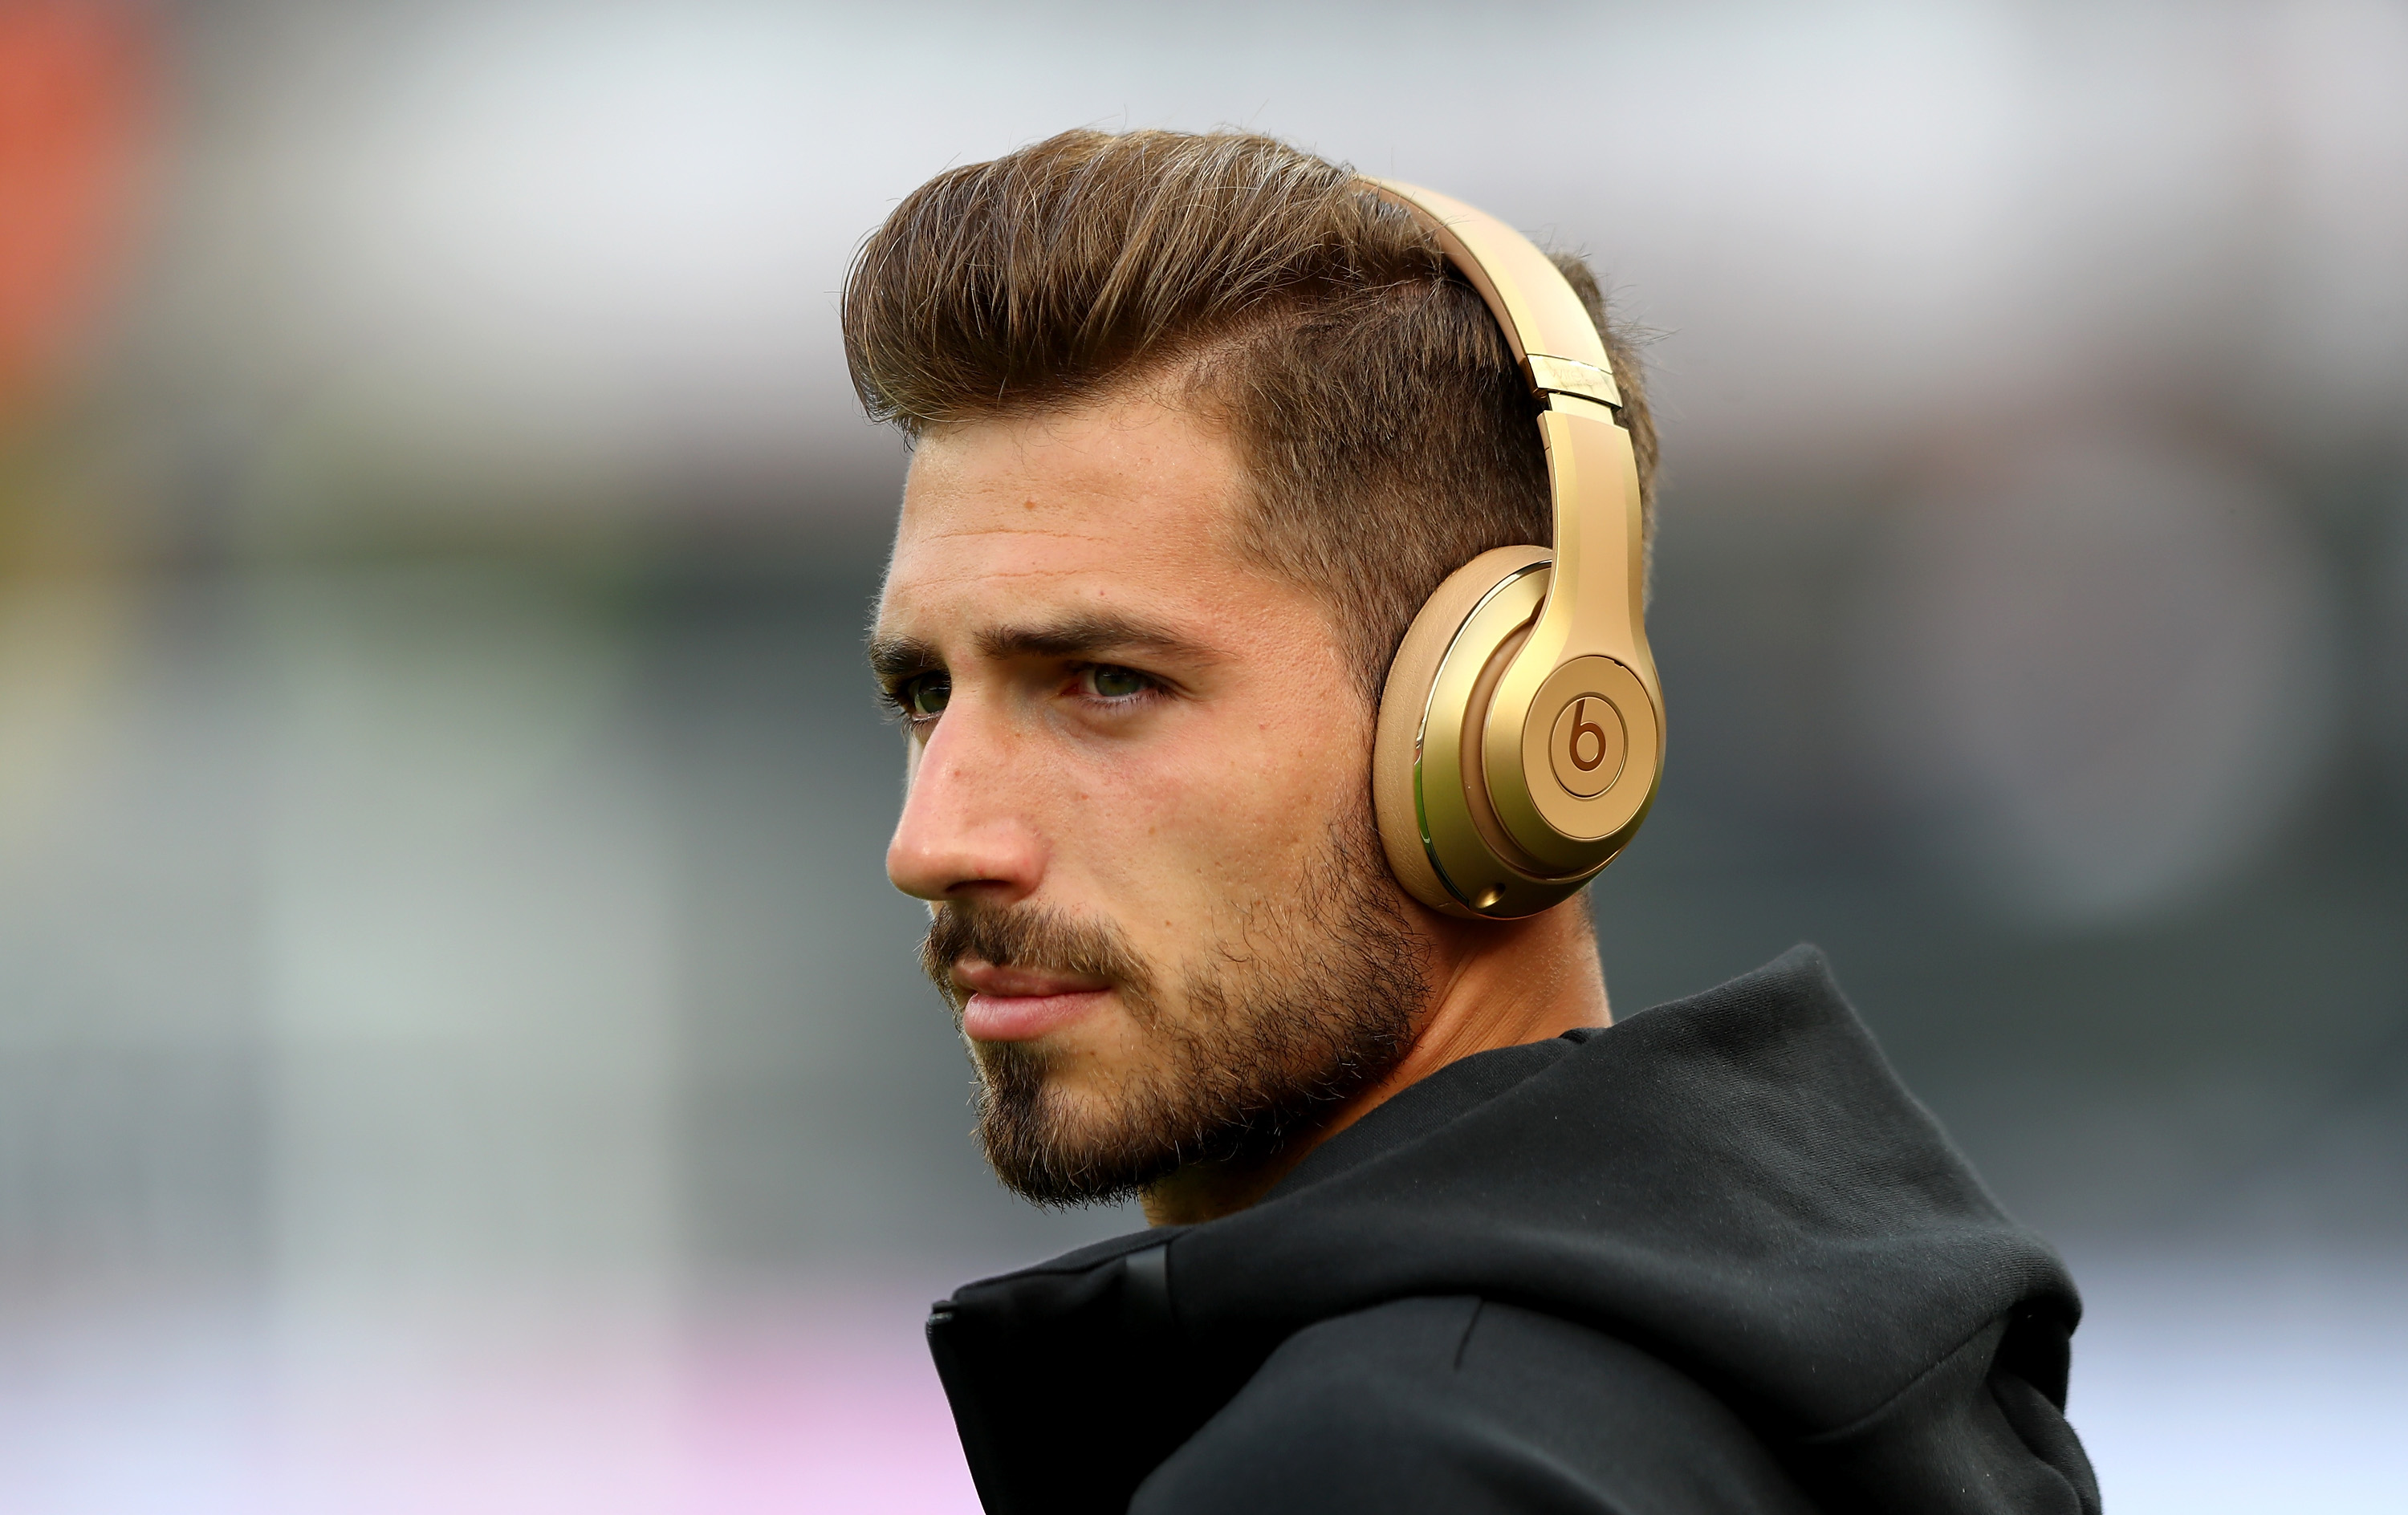 LEVERKUSEN, GERMANY - JUNE 08: Kevin Trapp of Germany looks onbefore the International Friendly match between Germany and Saudi Arabia at BayArena on June 8, 2018 in Leverkusen, Germany.  (Photo by Martin Rose/Bongarts/Getty Images)